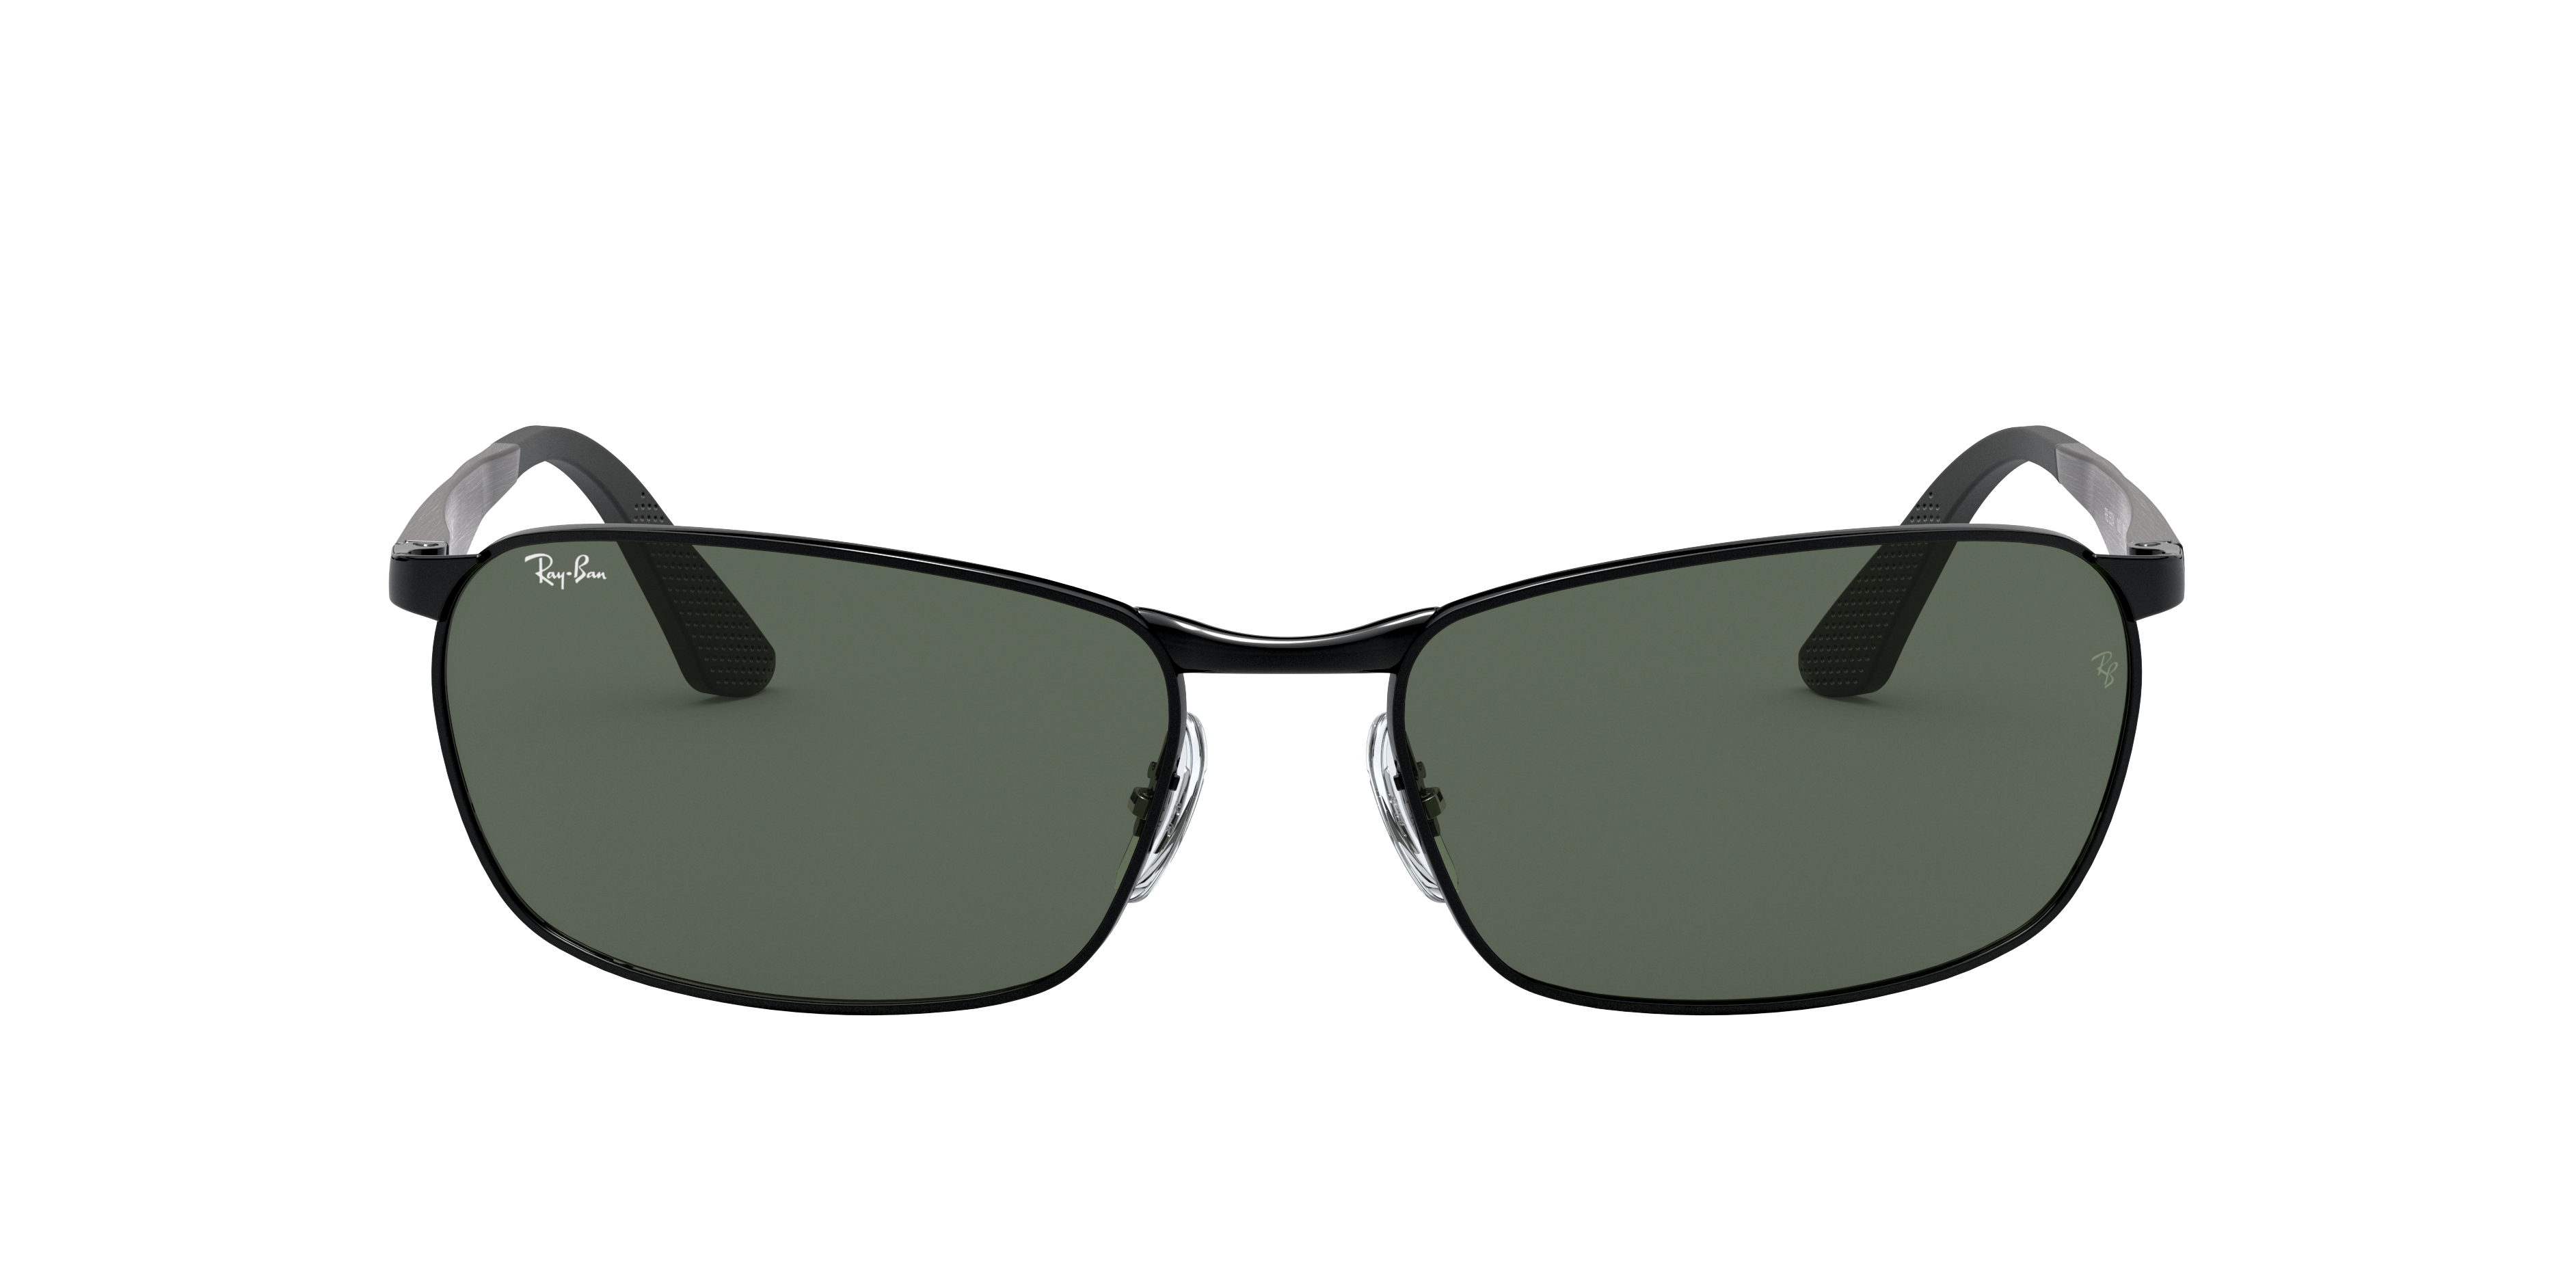 [products.image.front] Ray-Ban RB3534 002